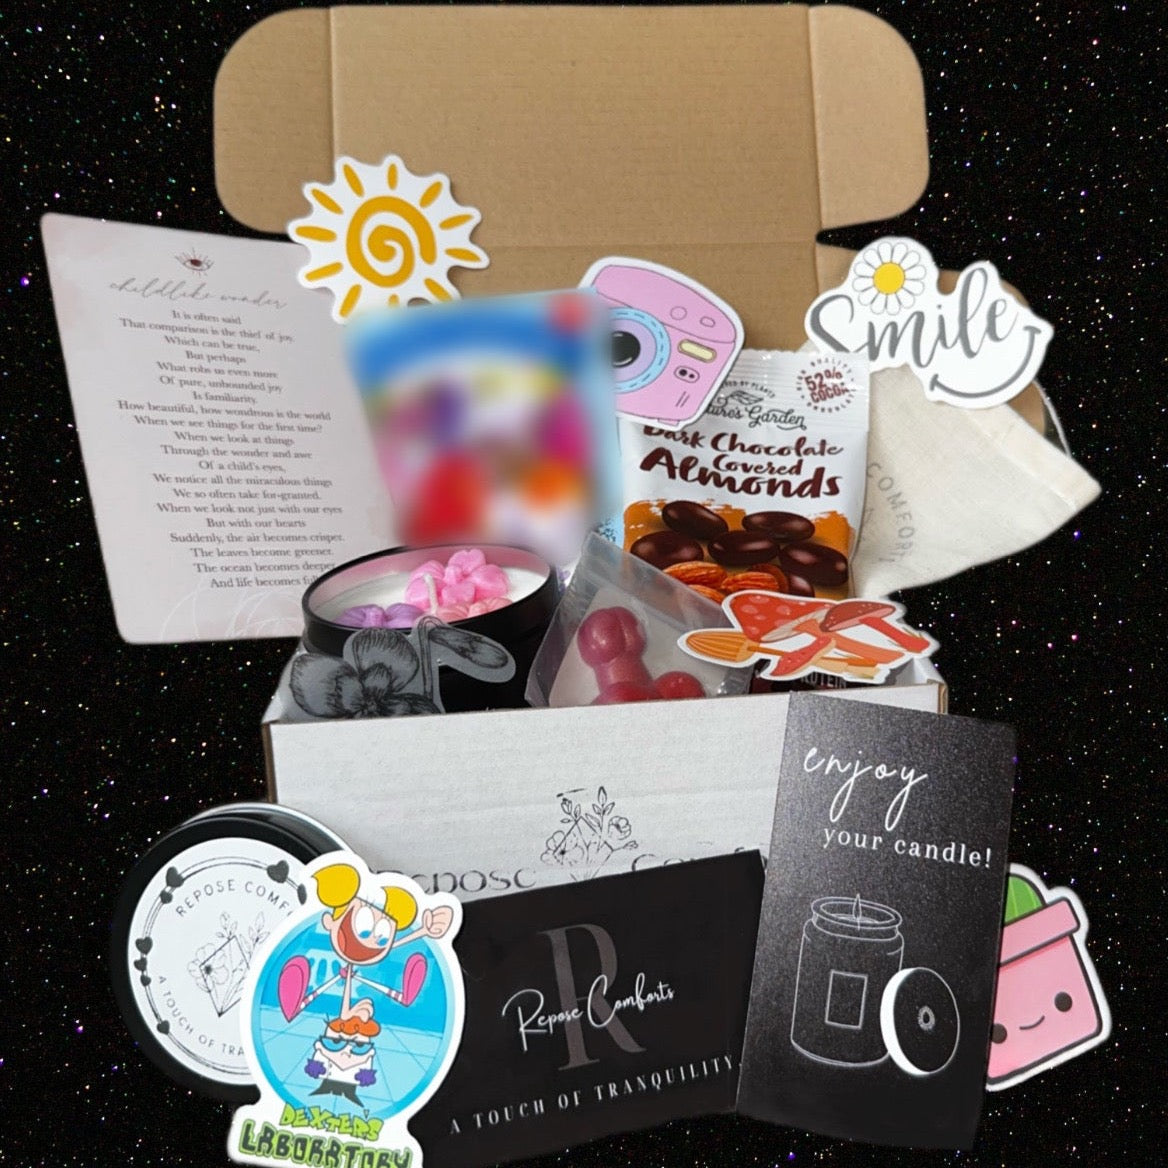 Monthly Candle Subscription Box